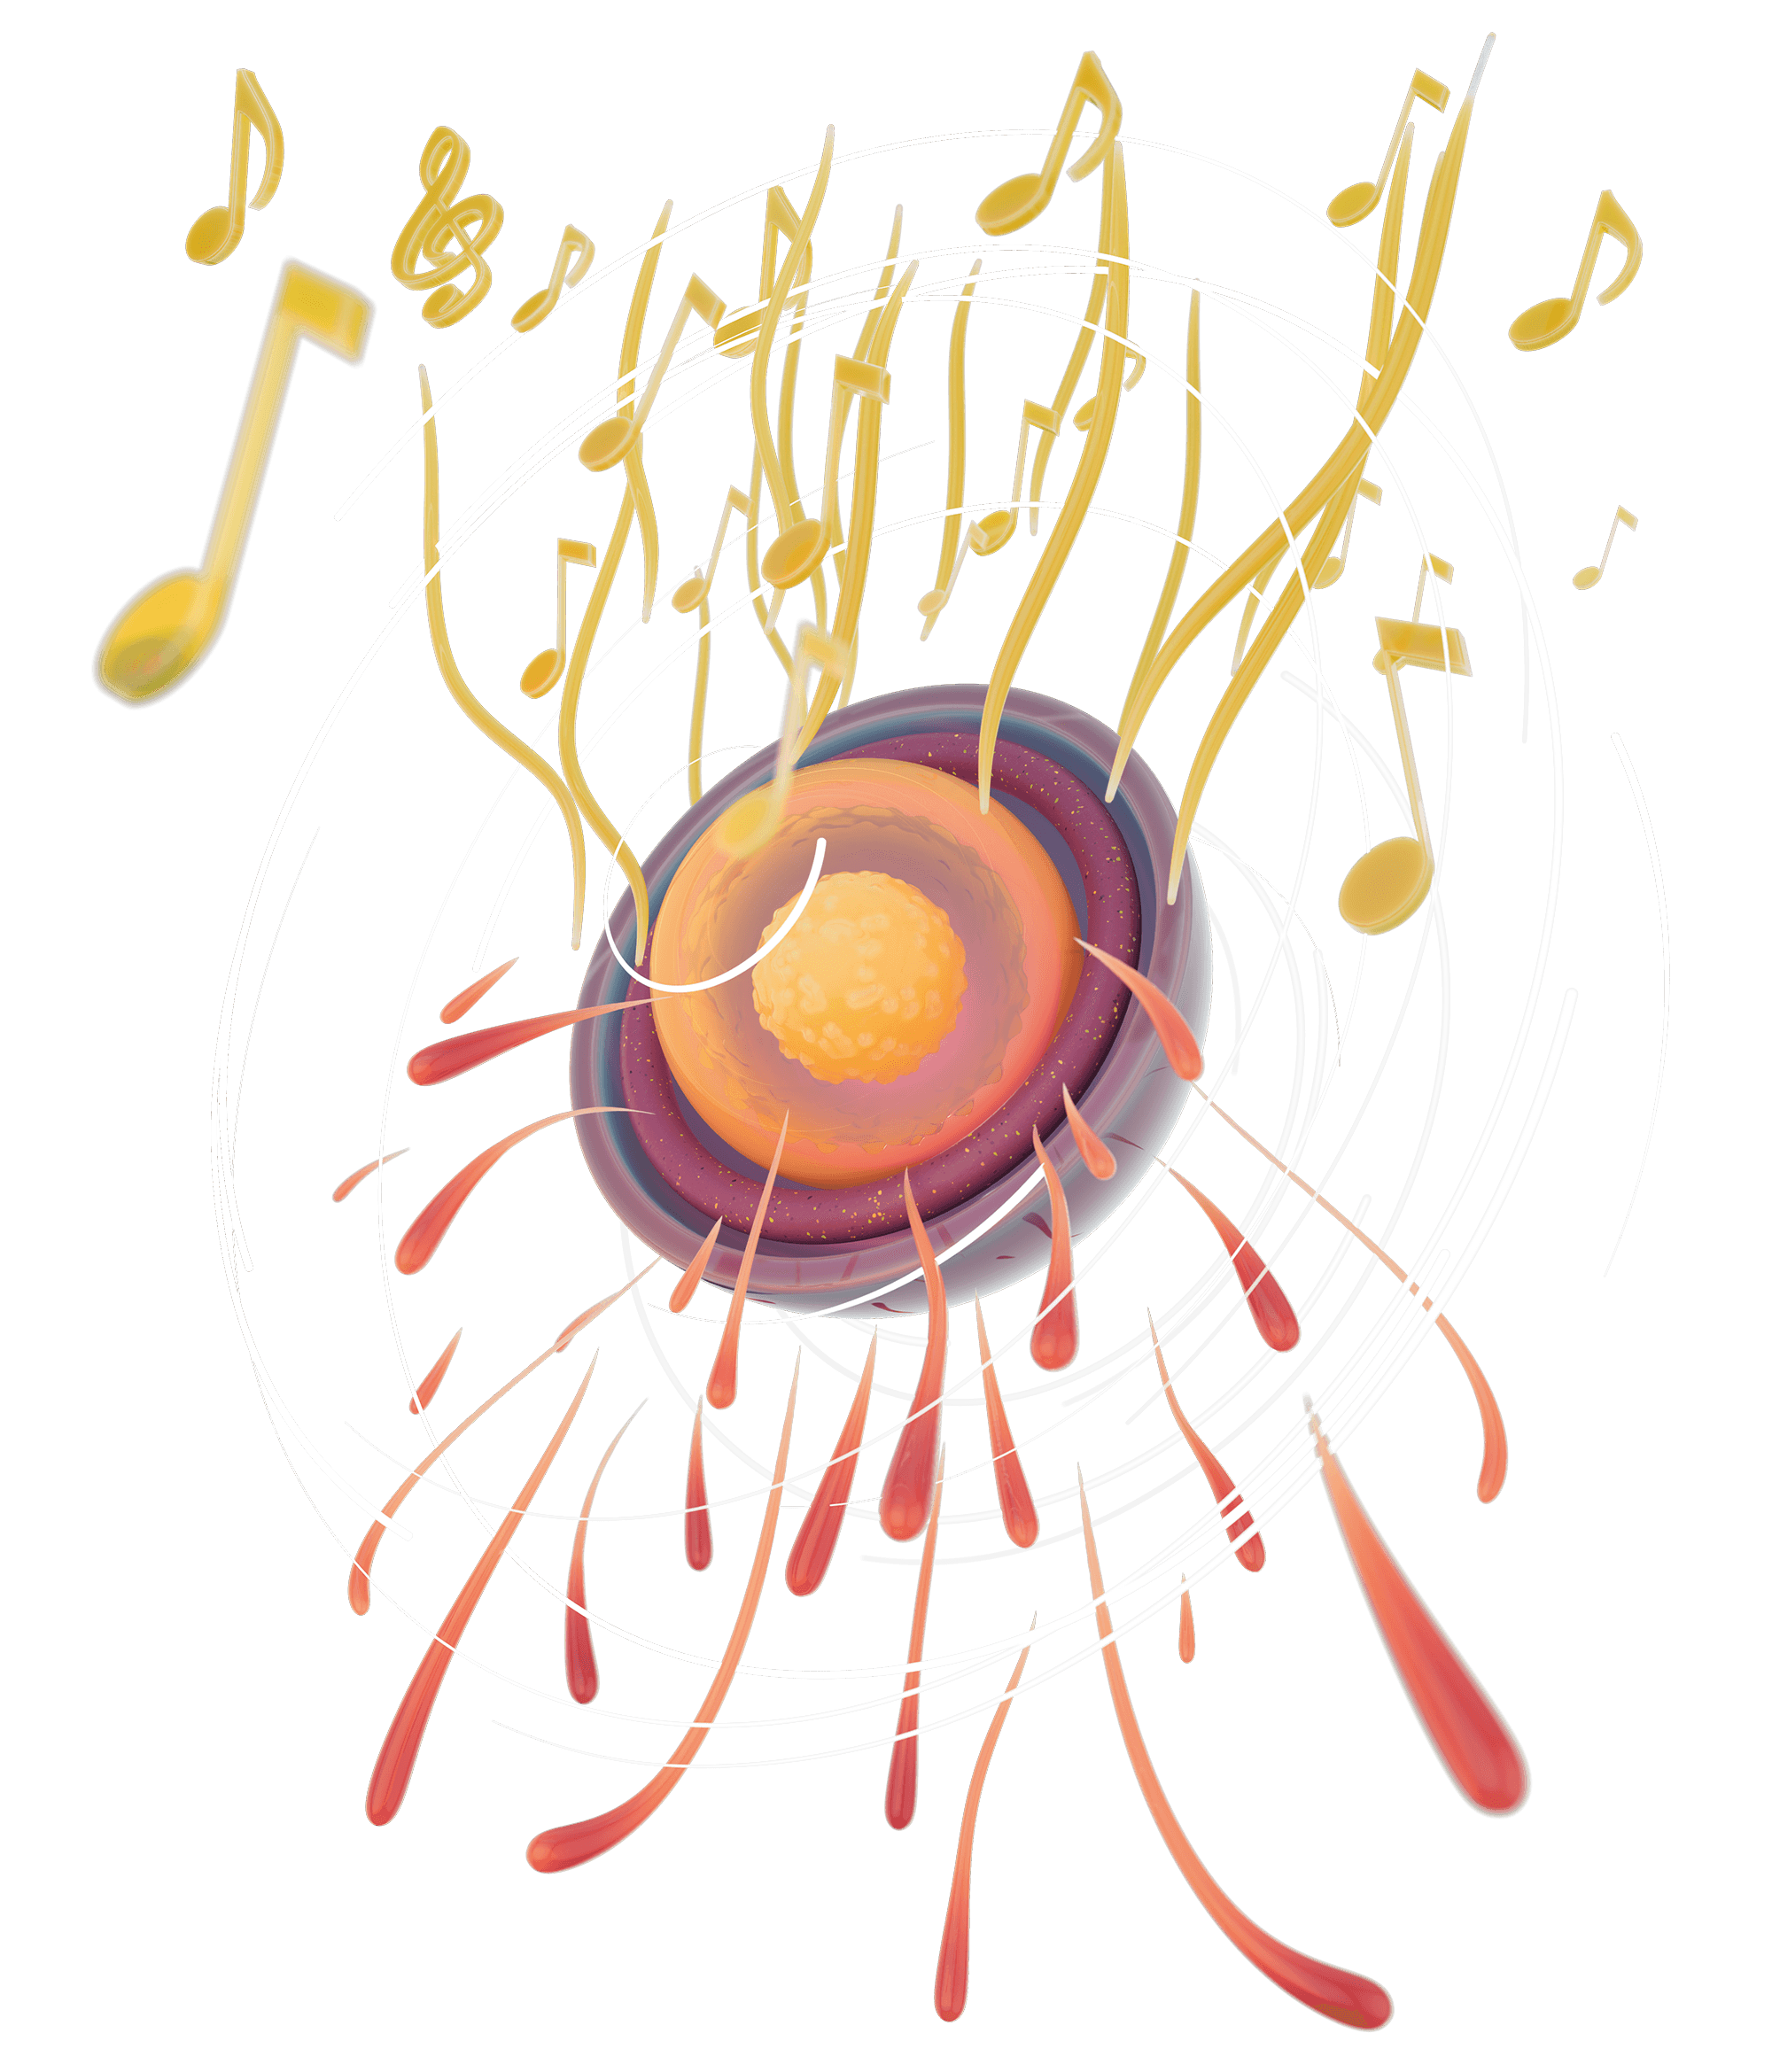 Illustration cell from which musical notes float out